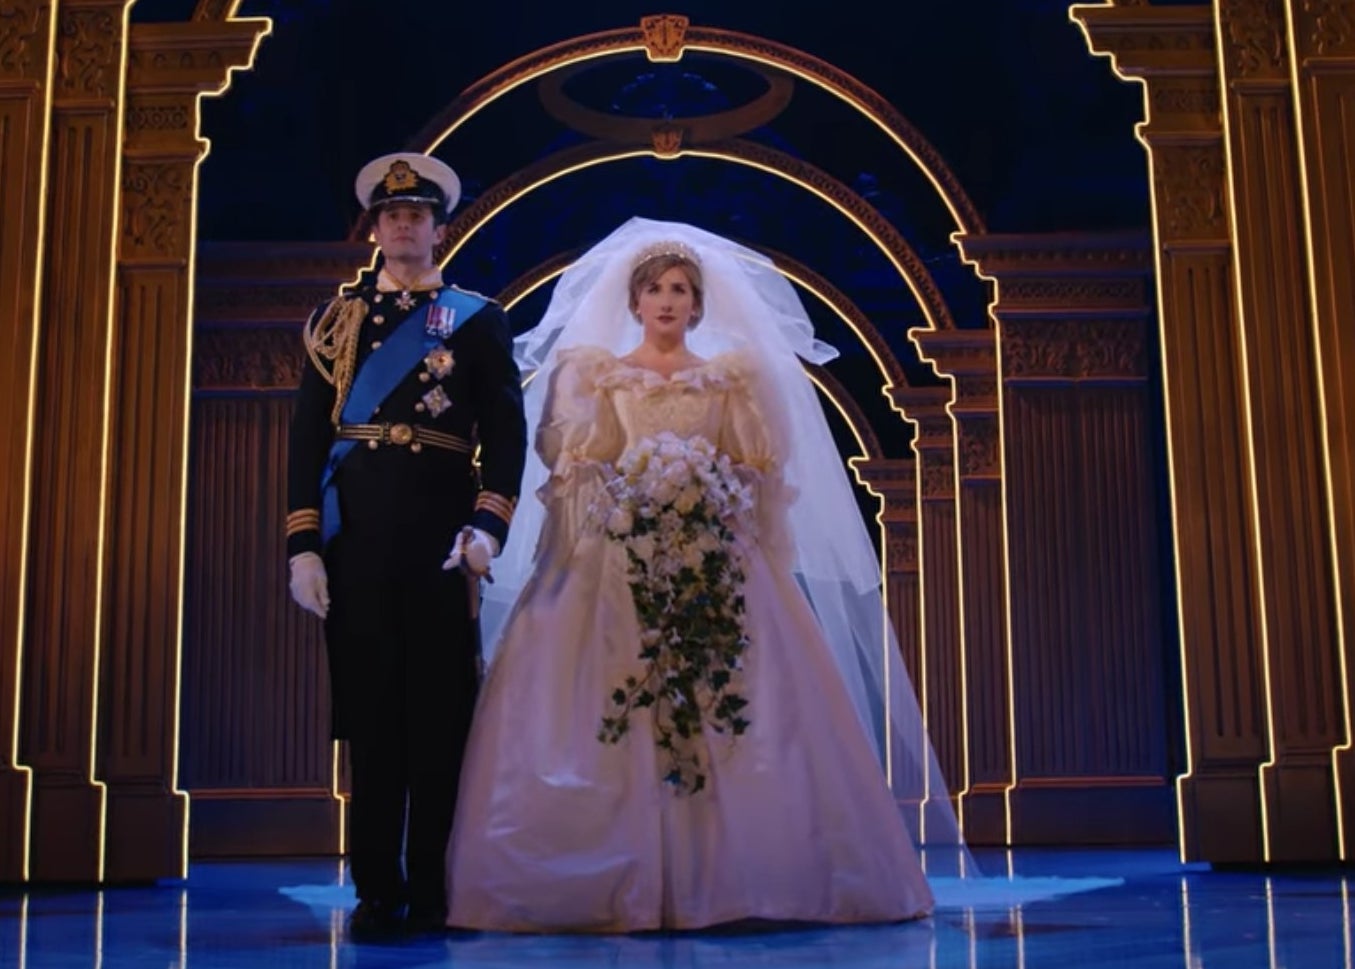 Roe Hartrampf as Prince Charles and Jeanna de Waal as Princess Diana in her wedding gown.